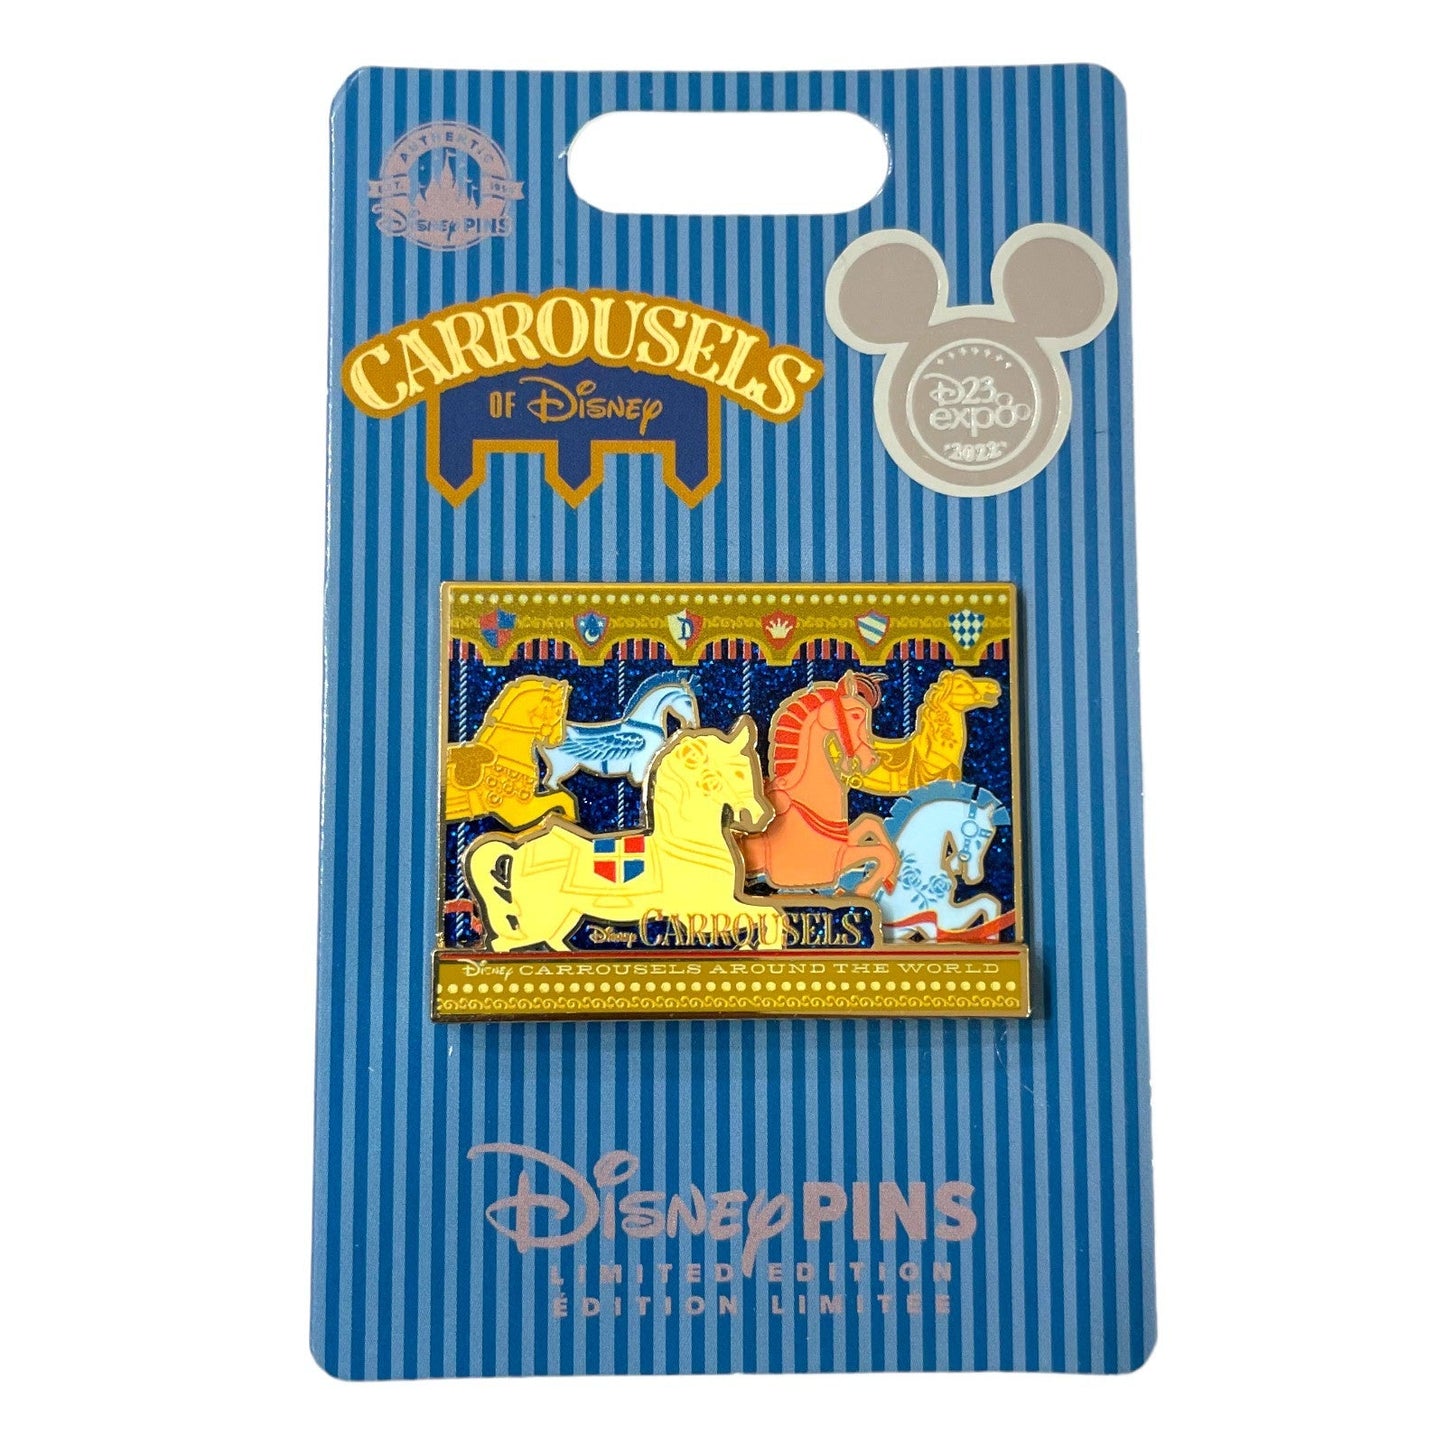 Carrousels of Disney - Group of Horses Pin - D23 Limited Edition